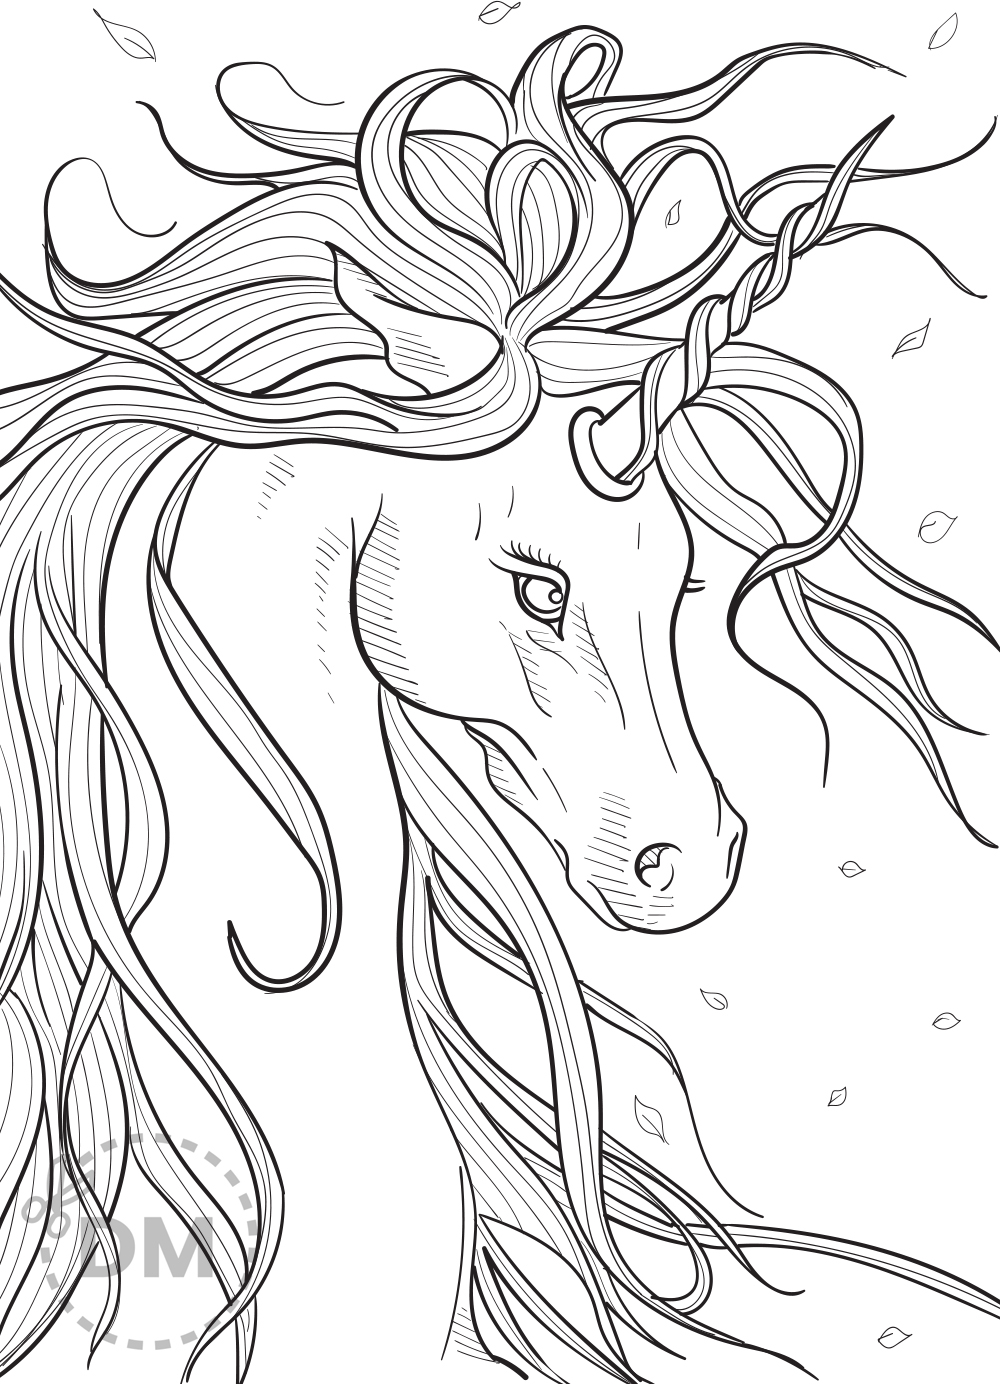 Unicorn Head Coloring Page For Teens and Adults - diy-magazine.com